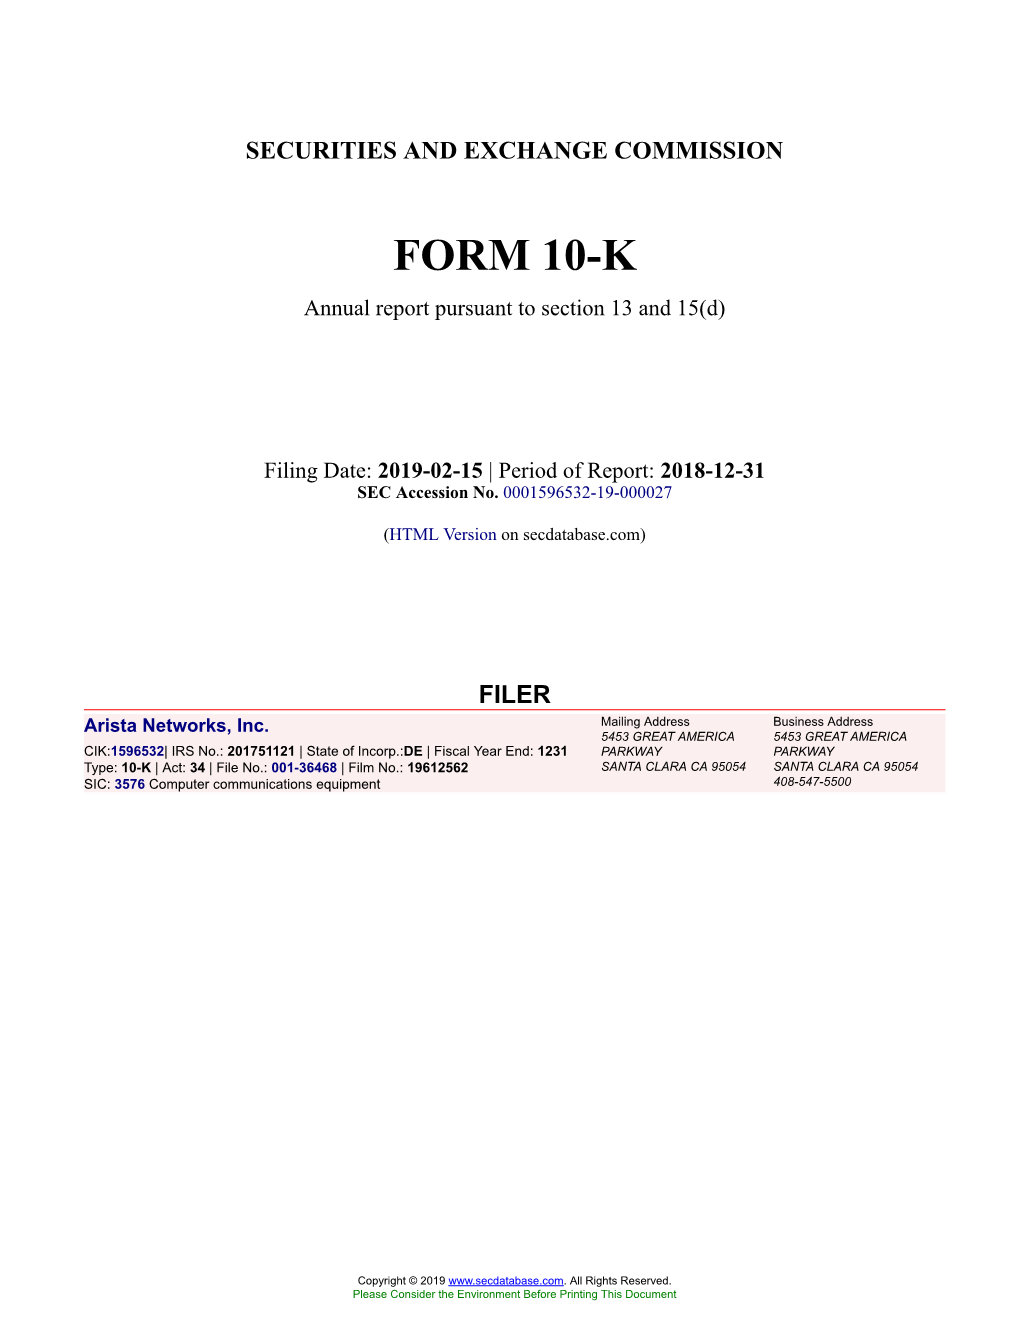 Arista Networks, Inc. Form 10-K Annual Report Filed 2019-02-15